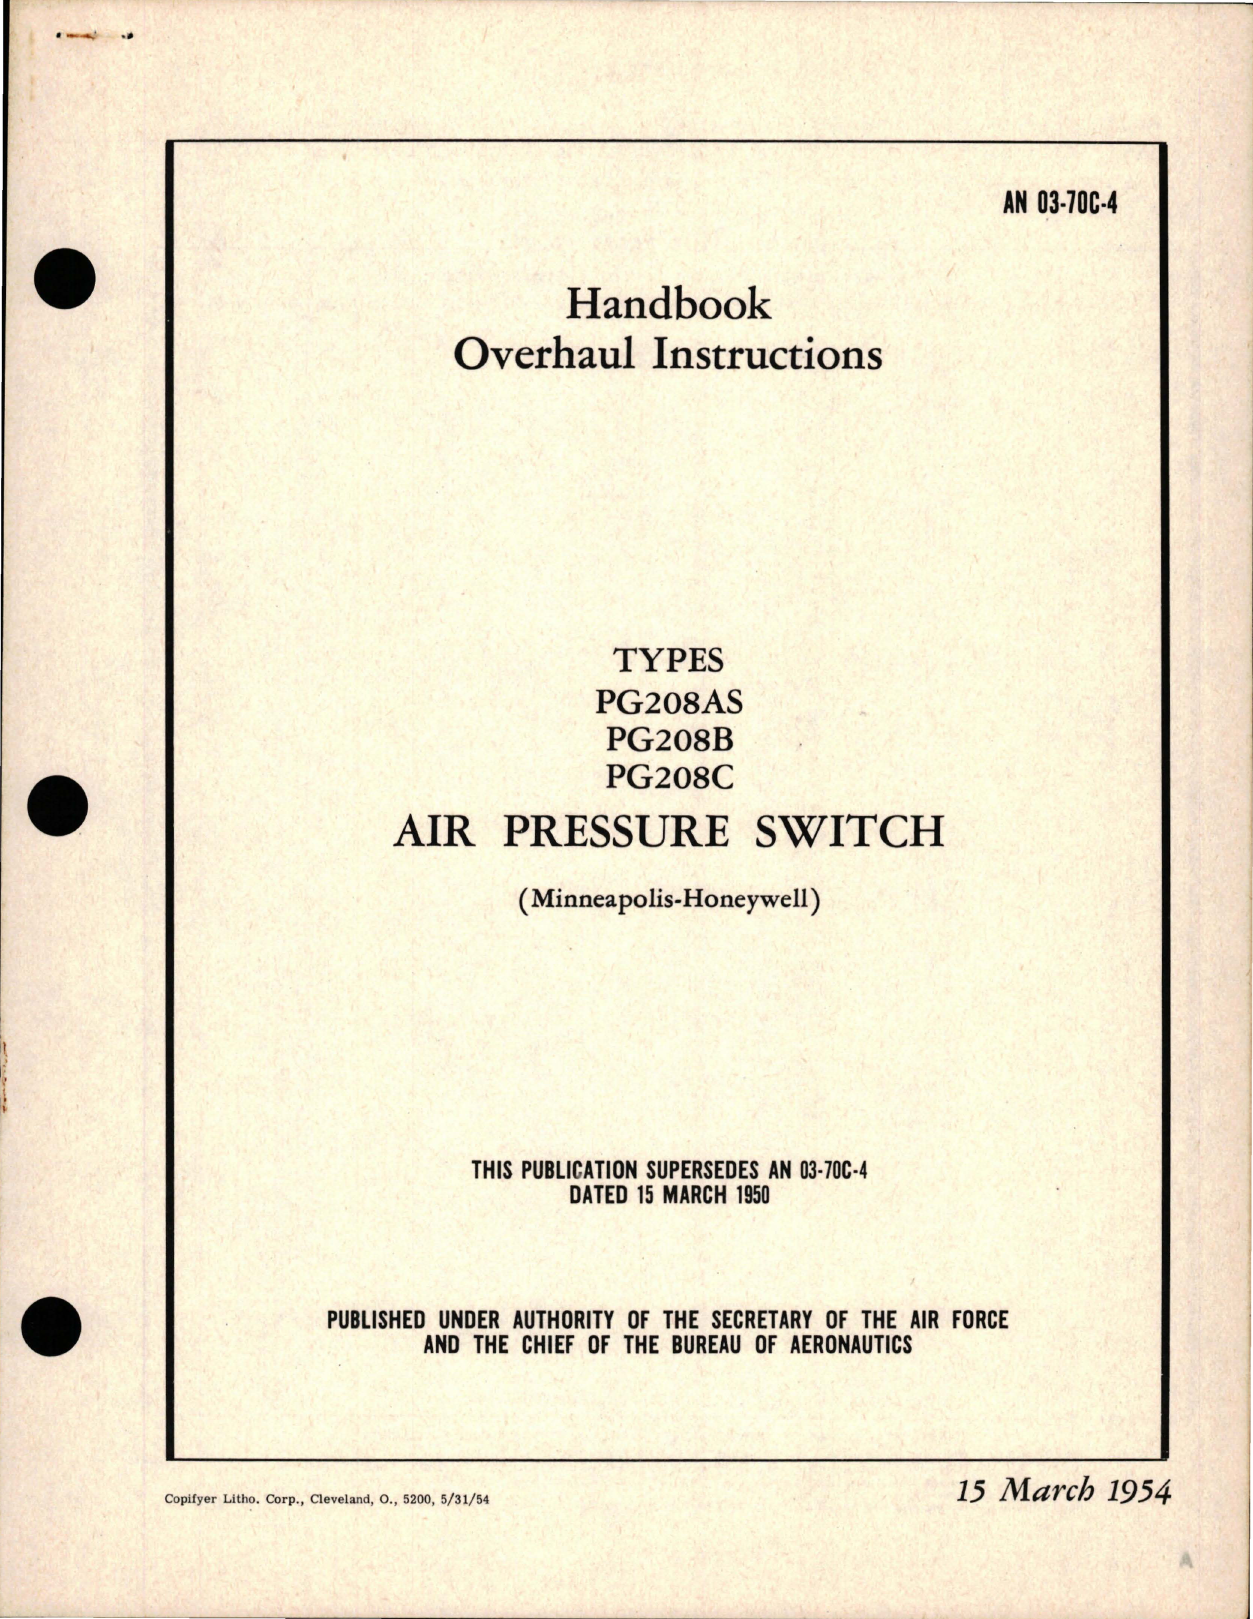 Sample page 1 from AirCorps Library document: Overhaul Instructions for Air Pressure Switch - Types PG208AS, PG208B, and PG208C